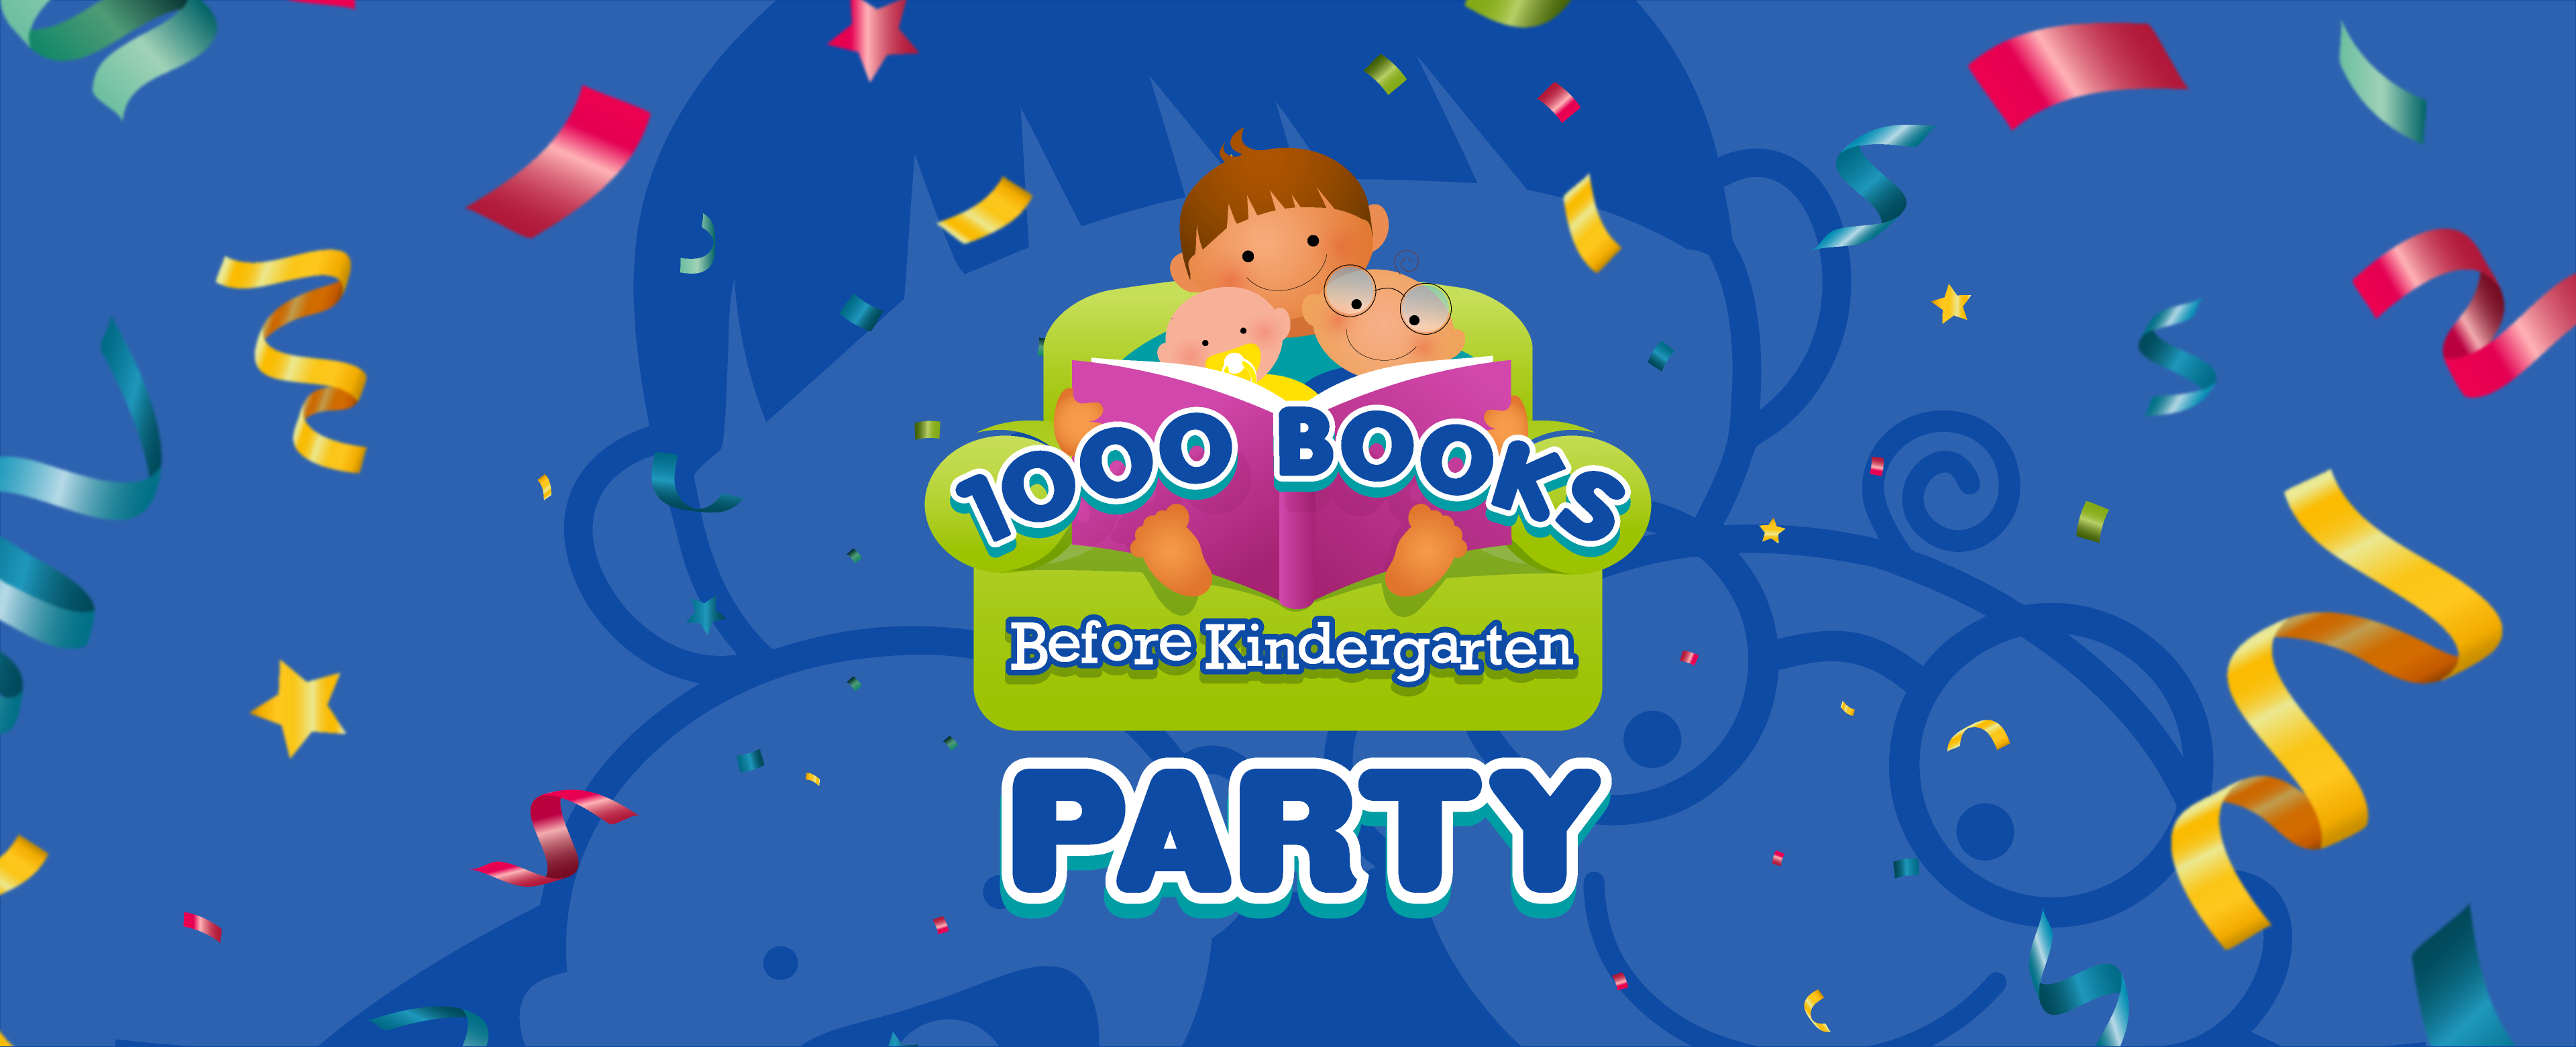 1000 Books Party